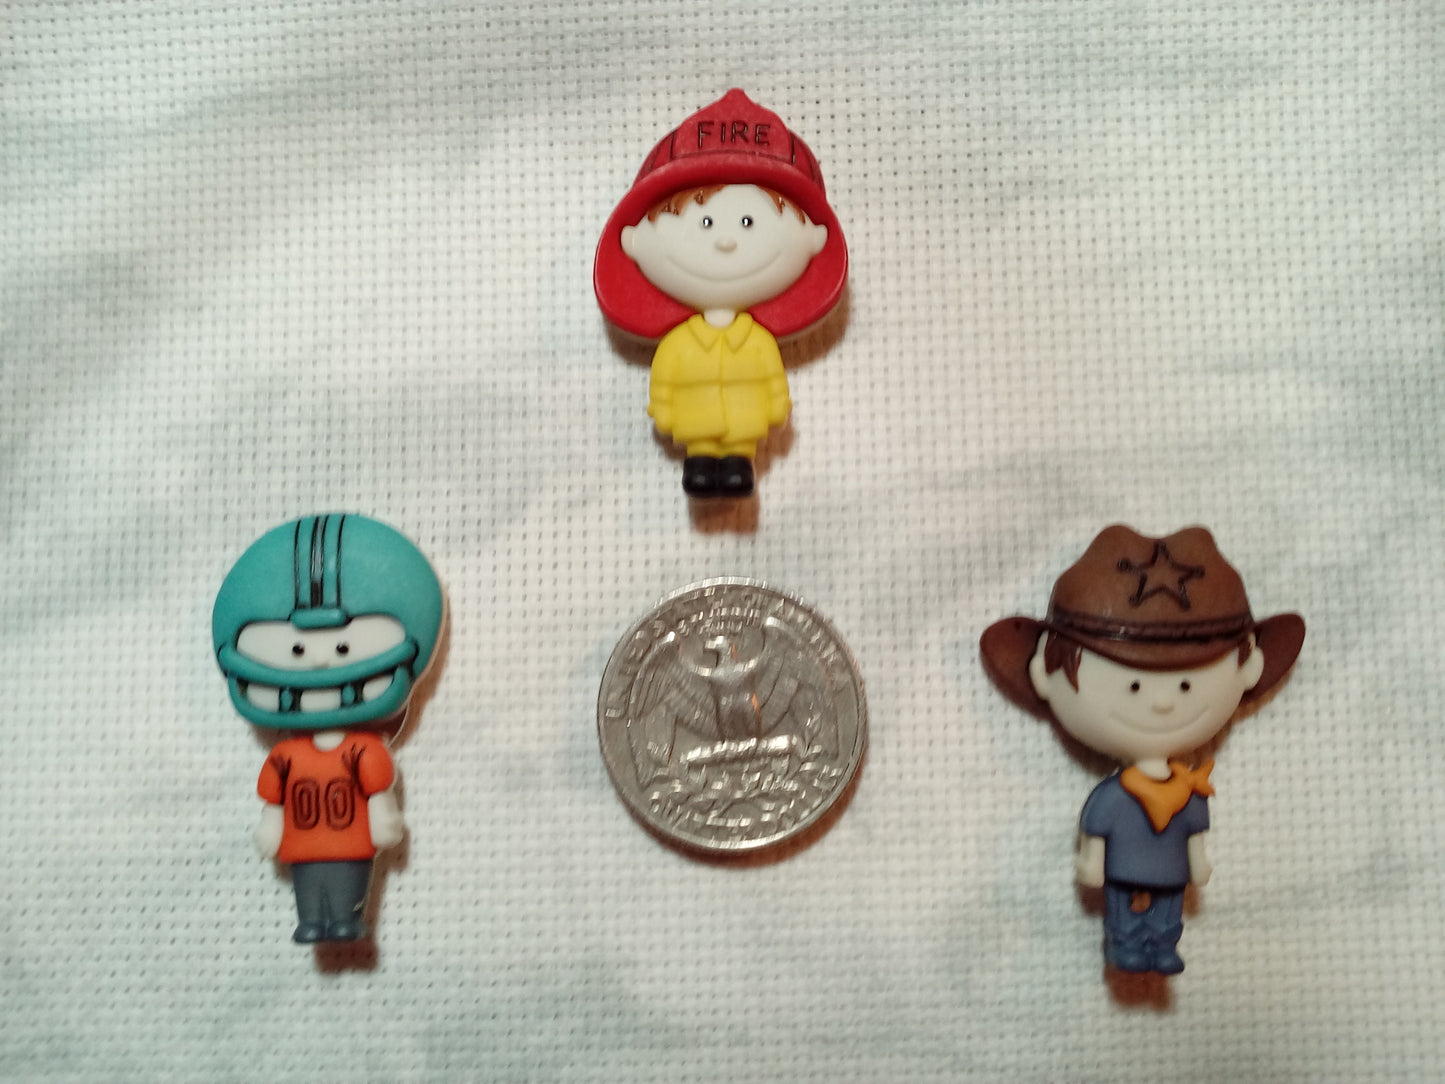 When he grows up cross stitch needle minders